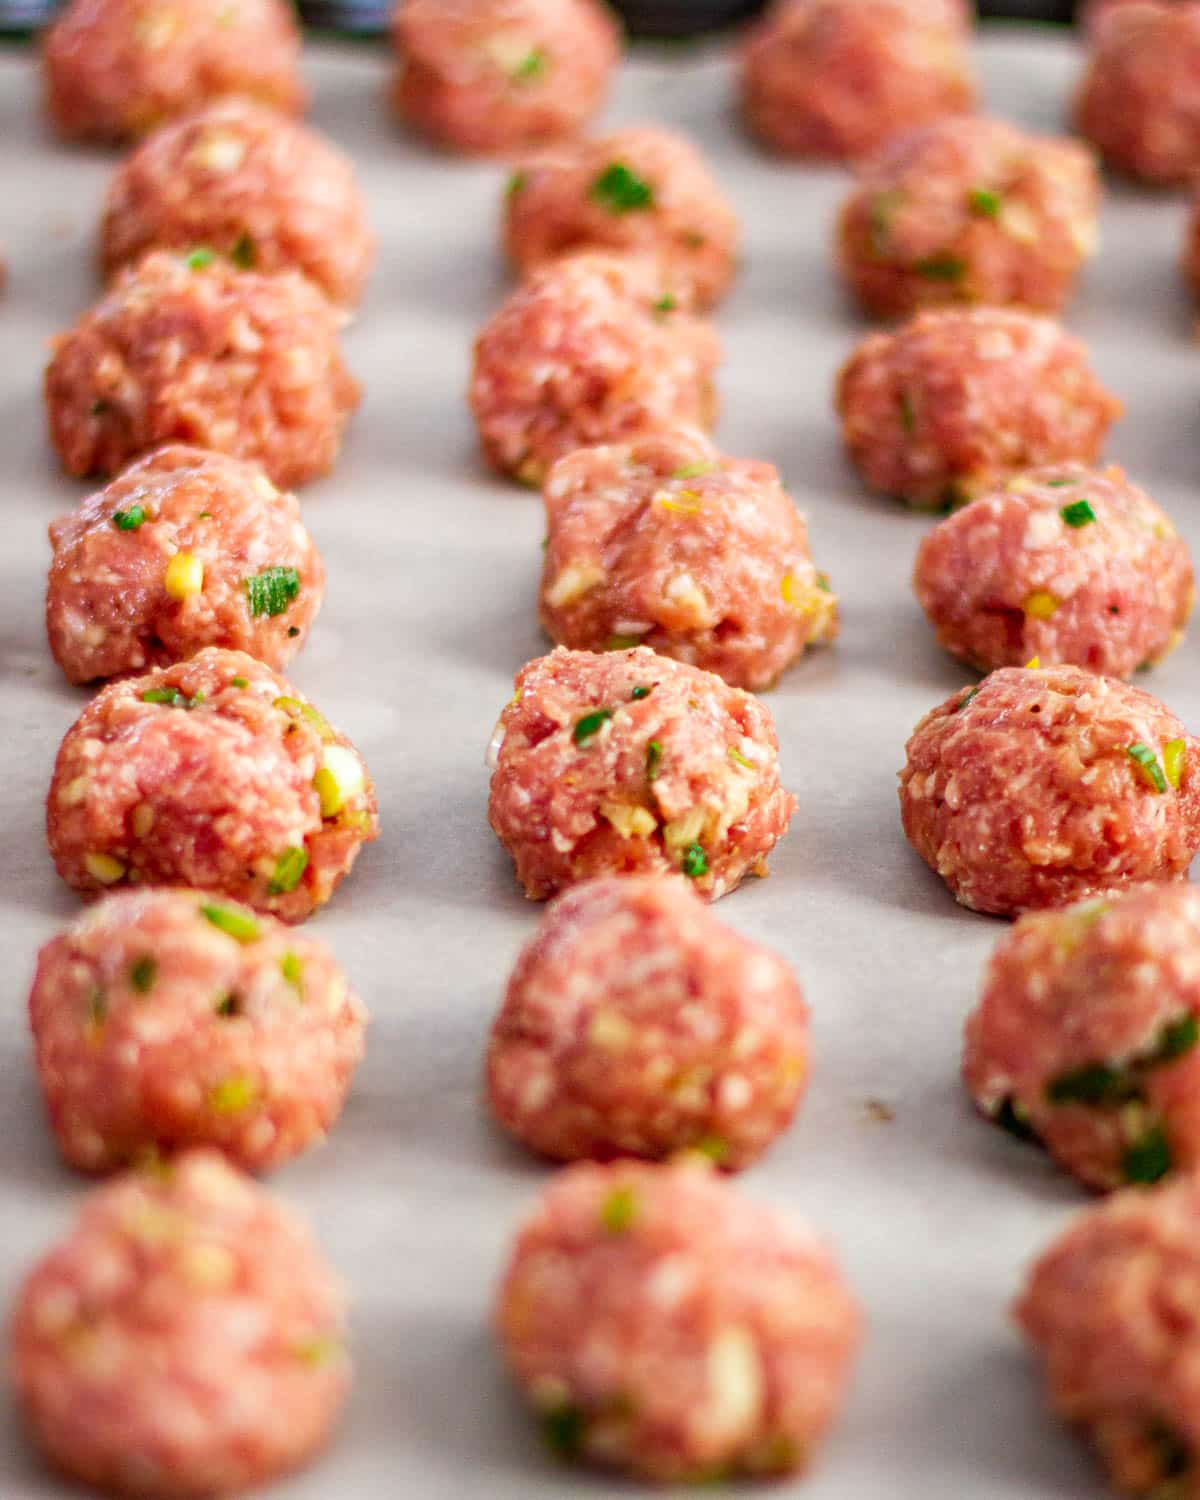 shaped meatballs on a baking sheet ready for baking